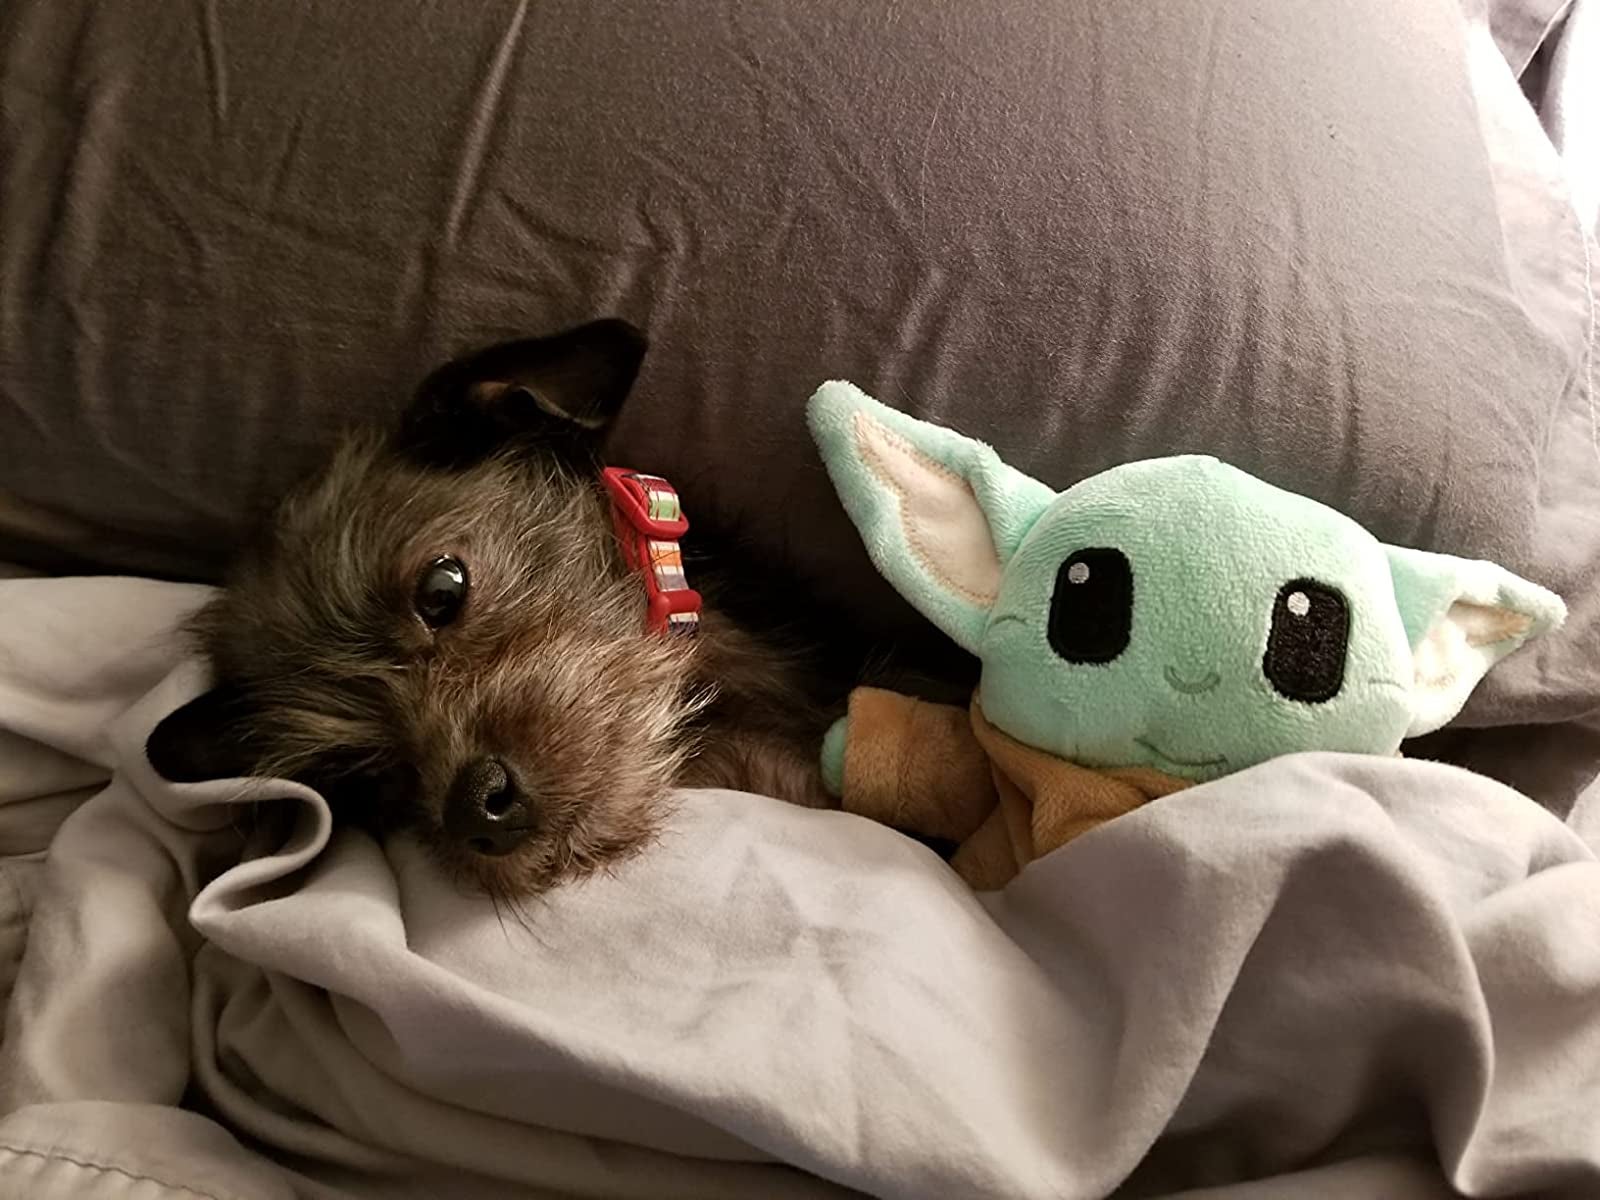 a dog snuggling with a baby yoda plush toy